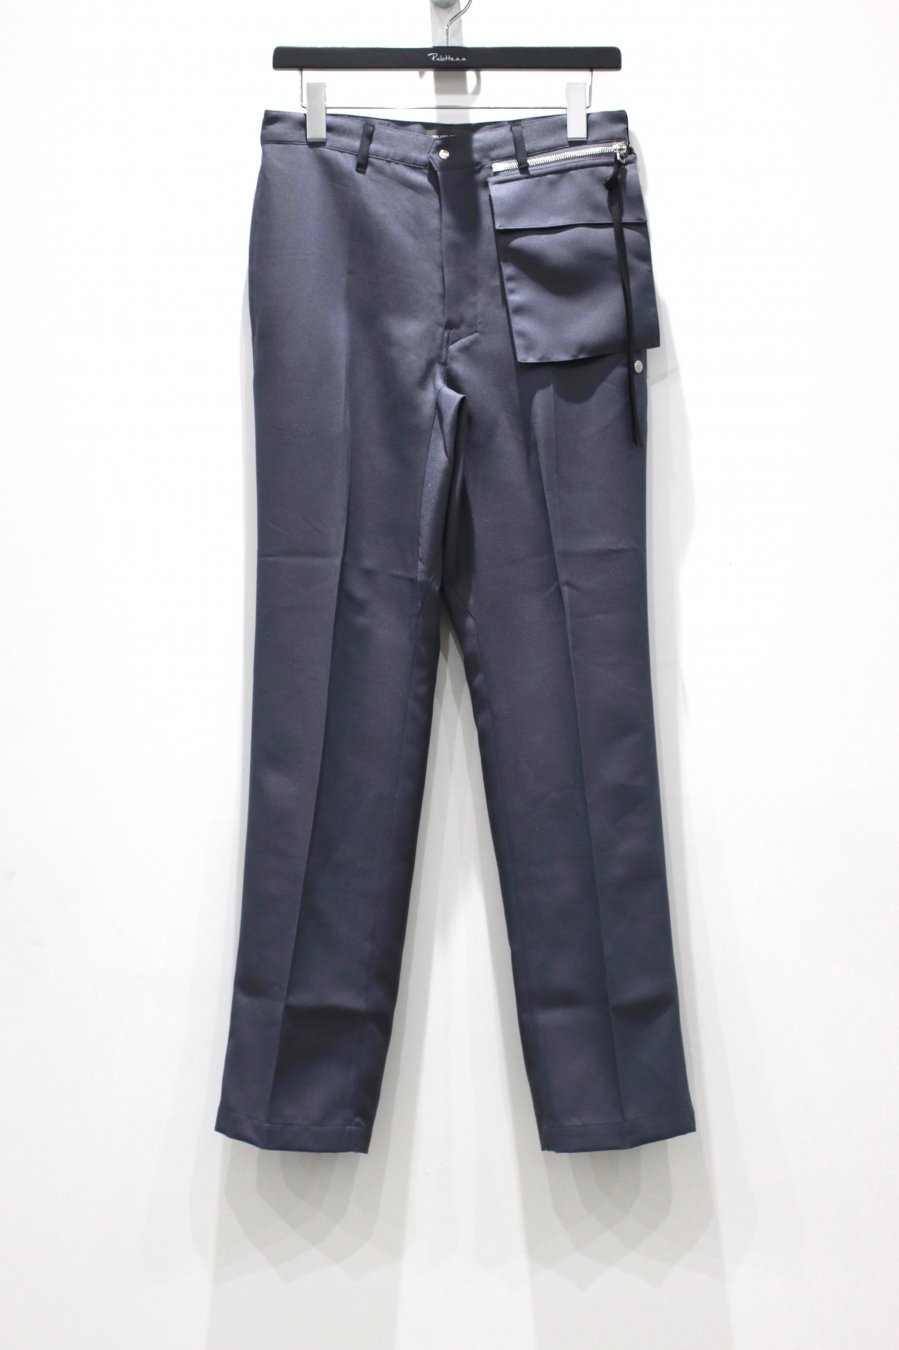 NULABEL  WORK DRESS TROUSERS（STEEL GREY）<img class='new_mark_img2' src='https://img.shop-pro.jp/img/new/icons15.gif' style='border:none;display:inline;margin:0px;padding:0px;width:auto;' />